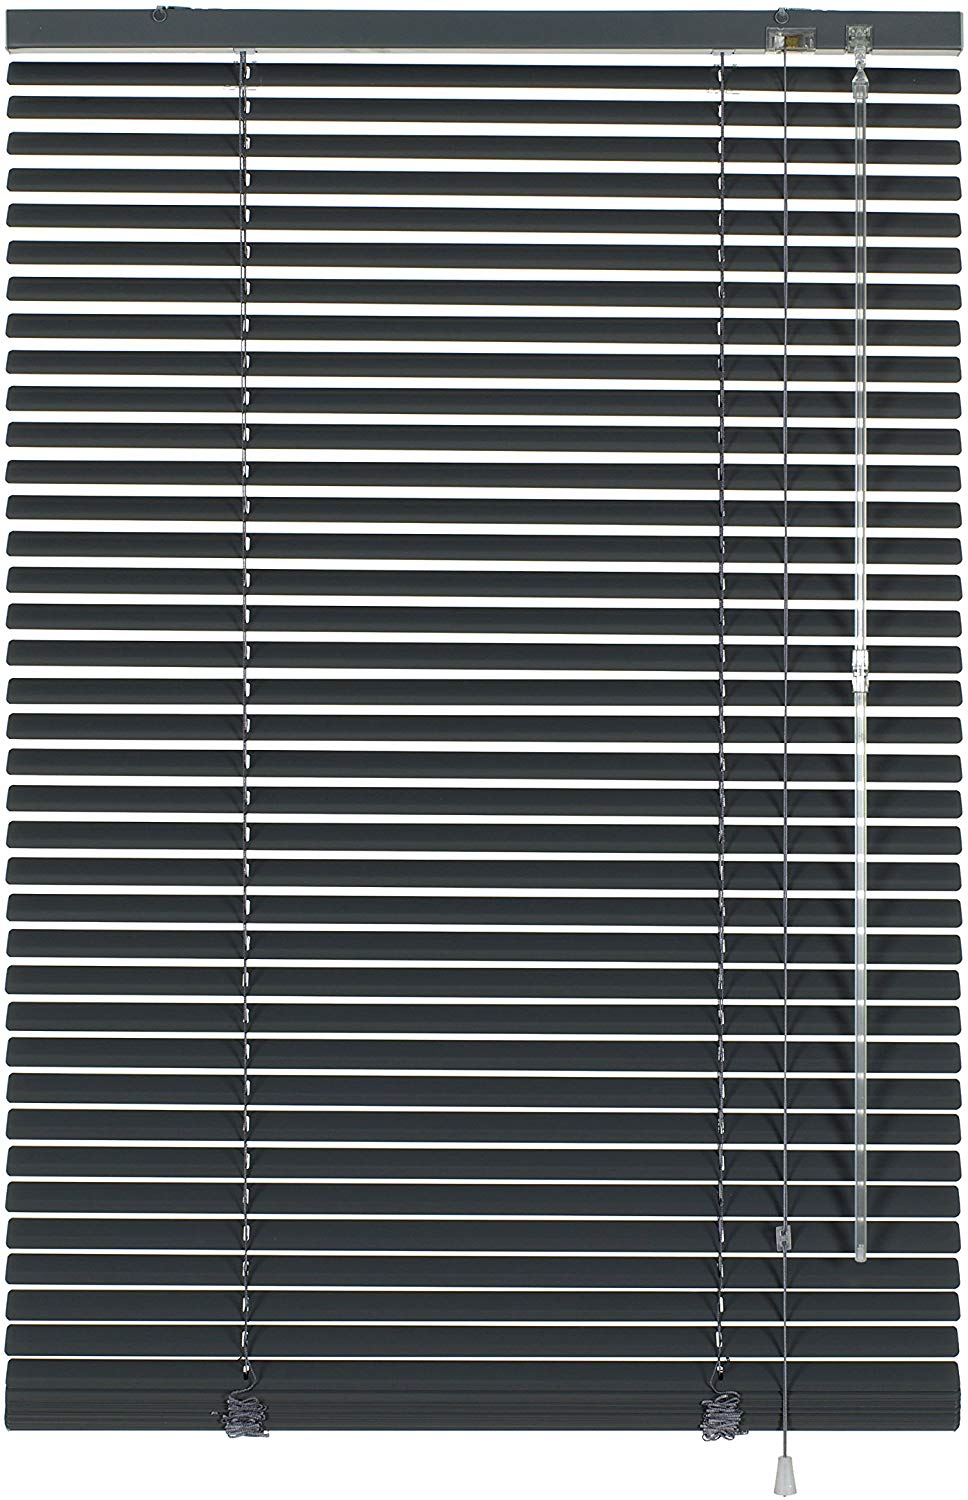 Light and Glare Protection Slate Grey Aluminium Venetian Blinds Wall and Ceiling Mounting GARDINIA Aluminium Venetian Blinds 60 x 175 cm Visibility WxH Mounting Kit Included